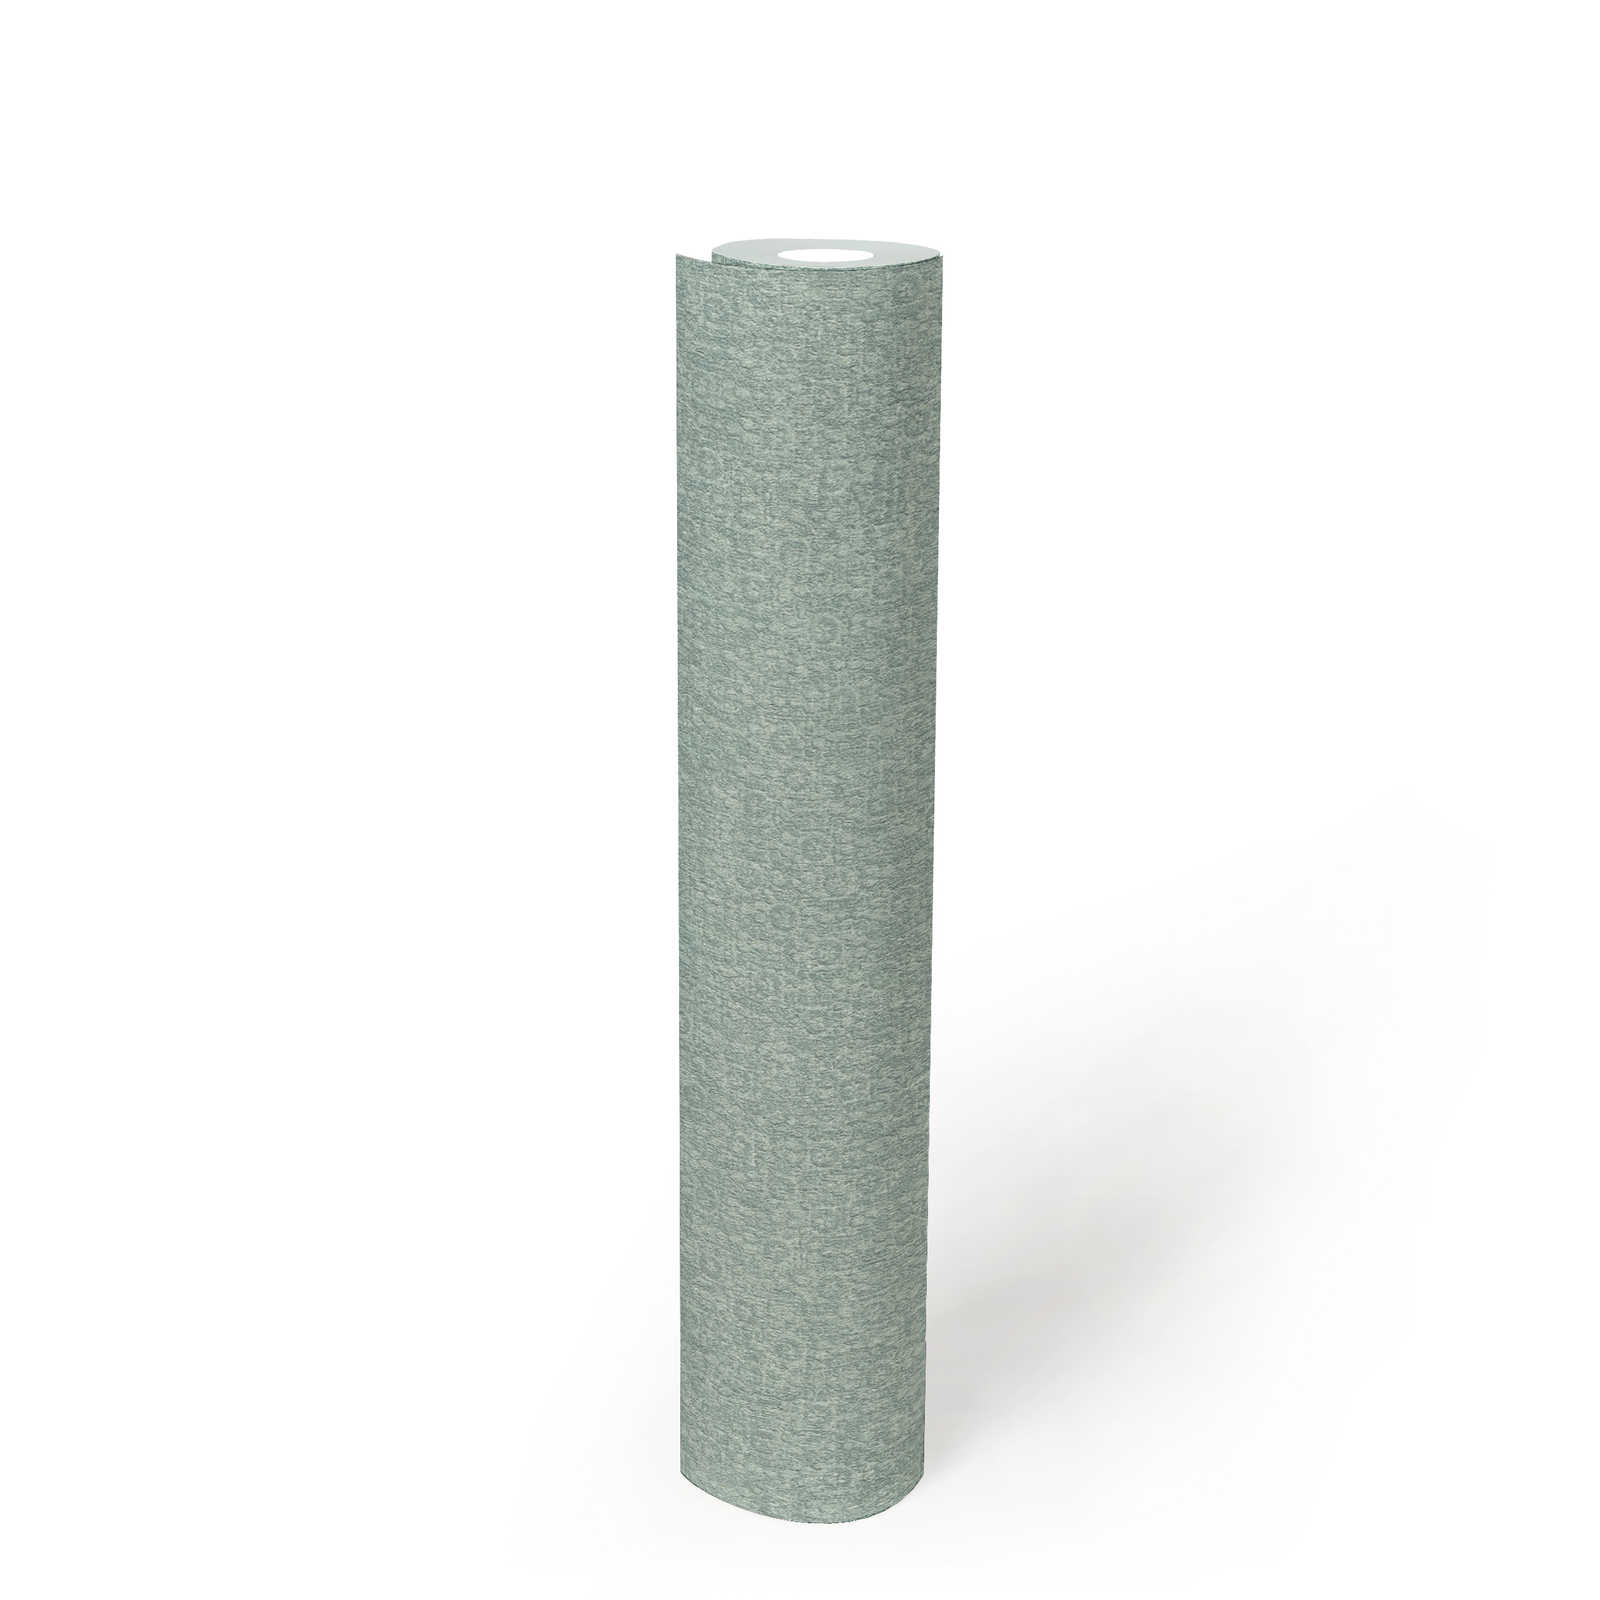             Textured wallpaper mint green with tone on tone pattern
        